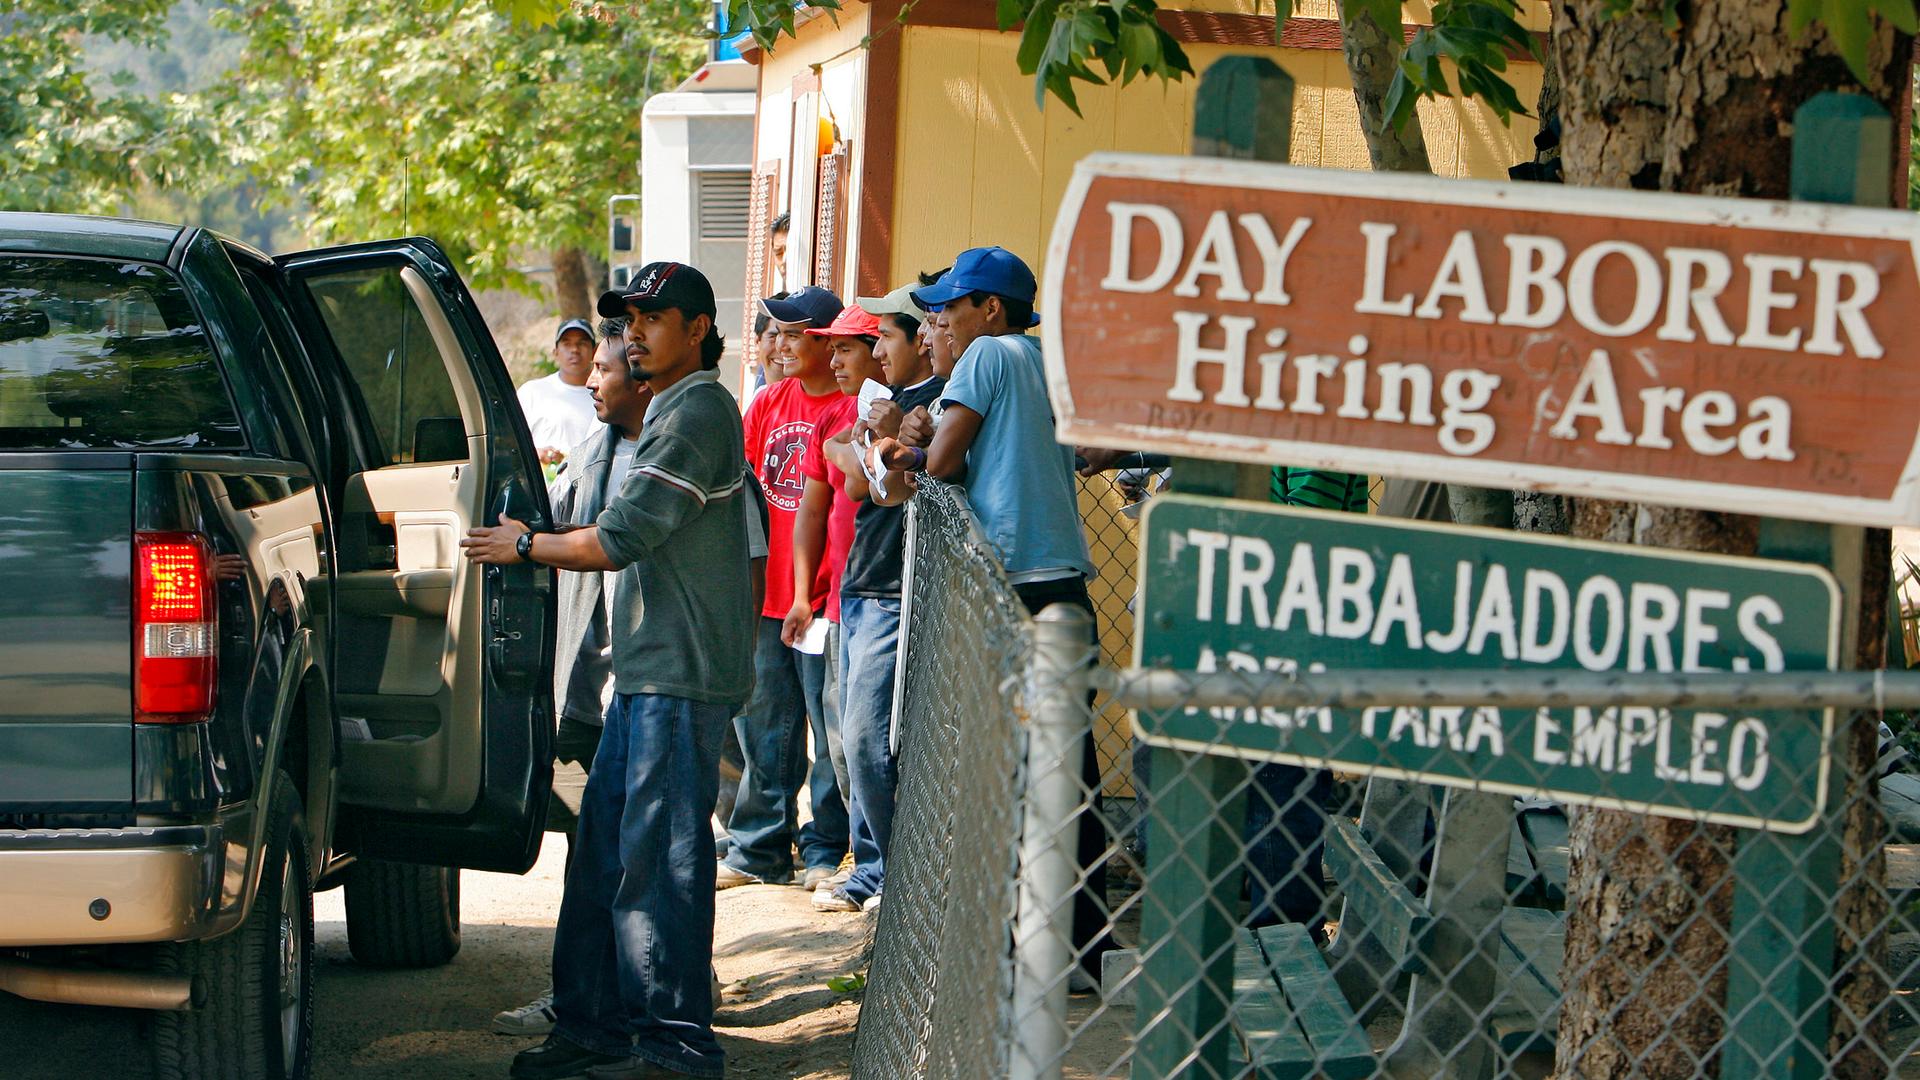 Day laborers enter a truck after being chosen by an employer at a hiring area in Laguna Beach, California